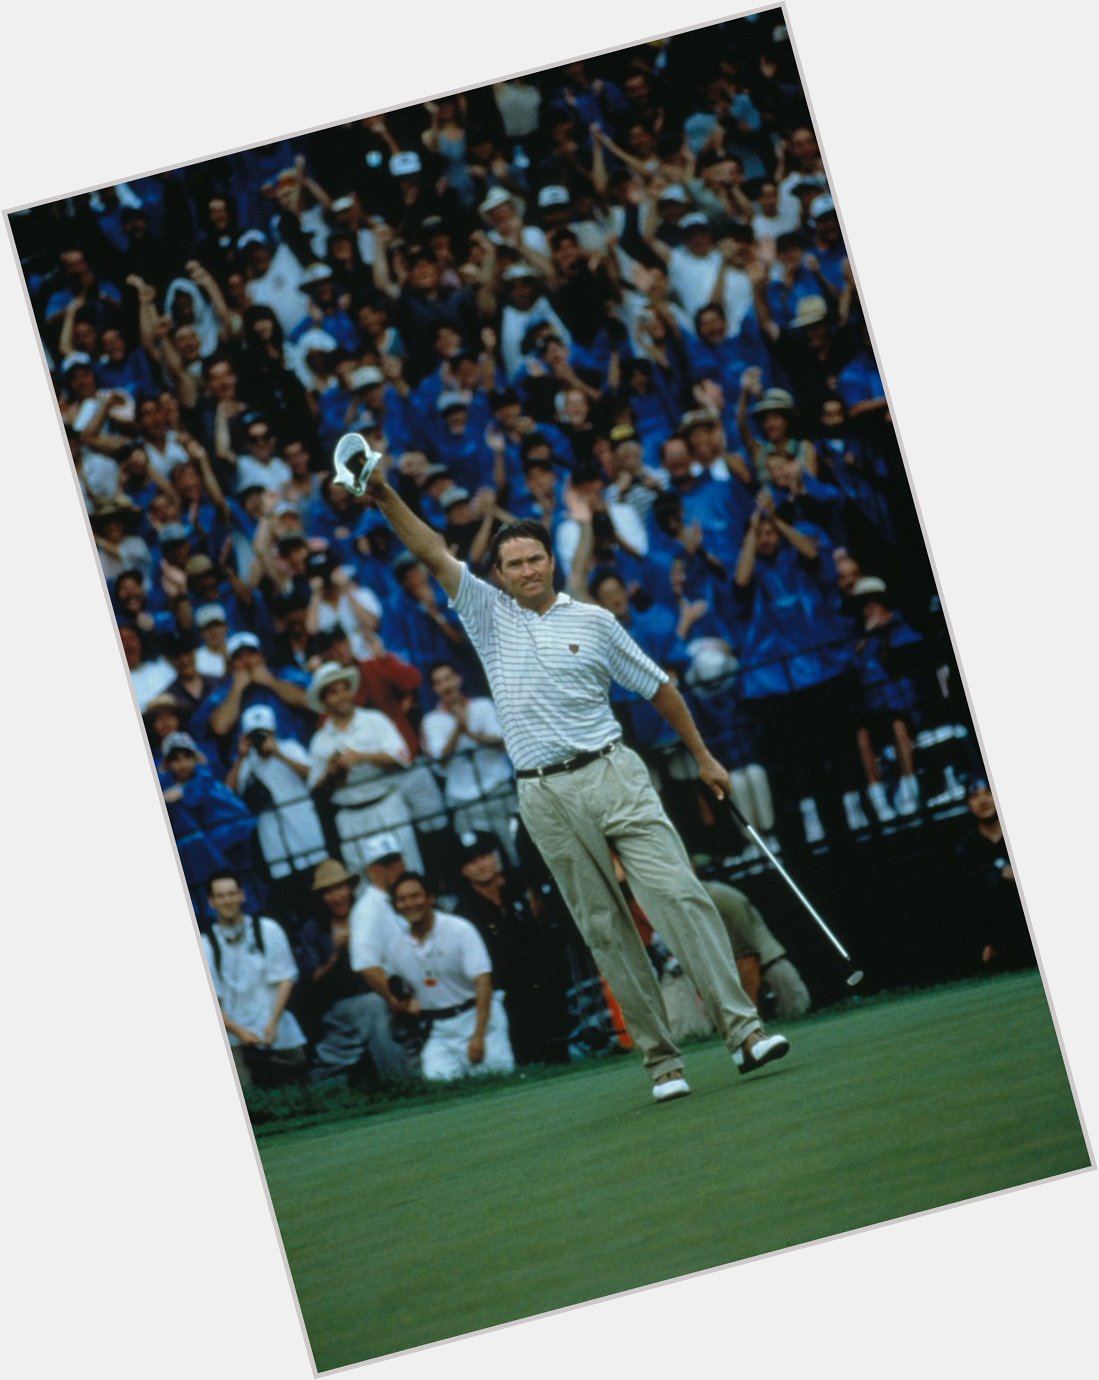 Happy Birthday to our 1997 Champion, Davis Love III. That sure was an incredible day at Winged Foot. 